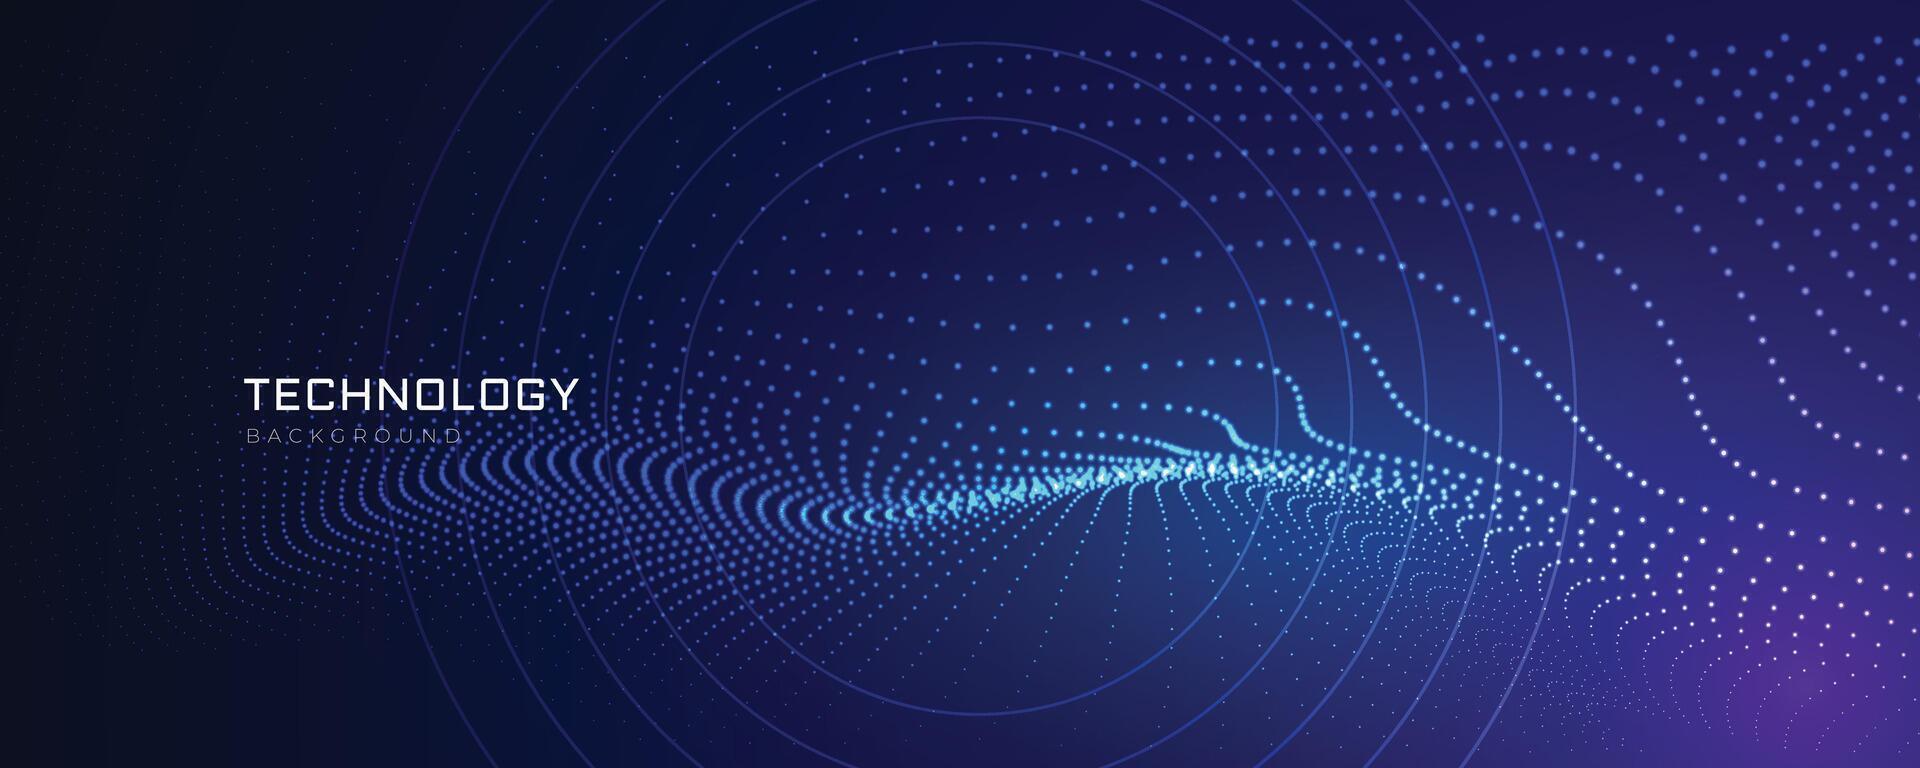 technology particles lines digital background vector